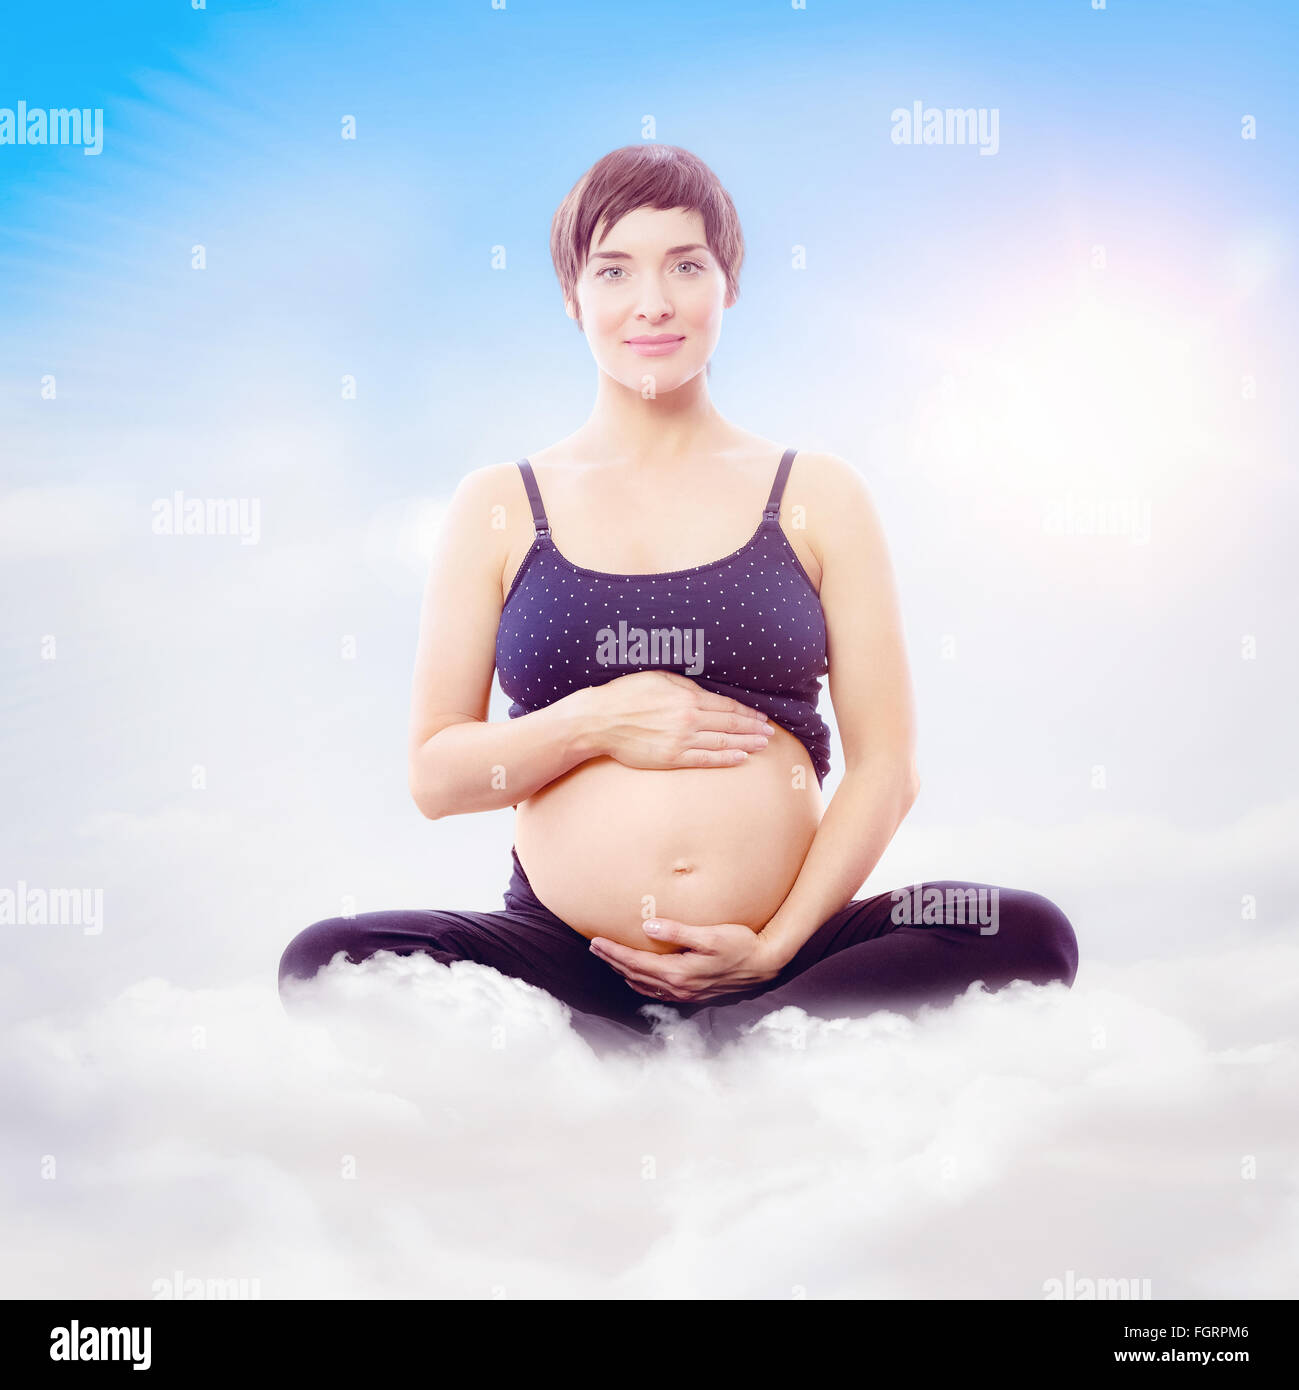 Composite image of portrait of happy expecting woman sitting on exercise mat Stock Photo